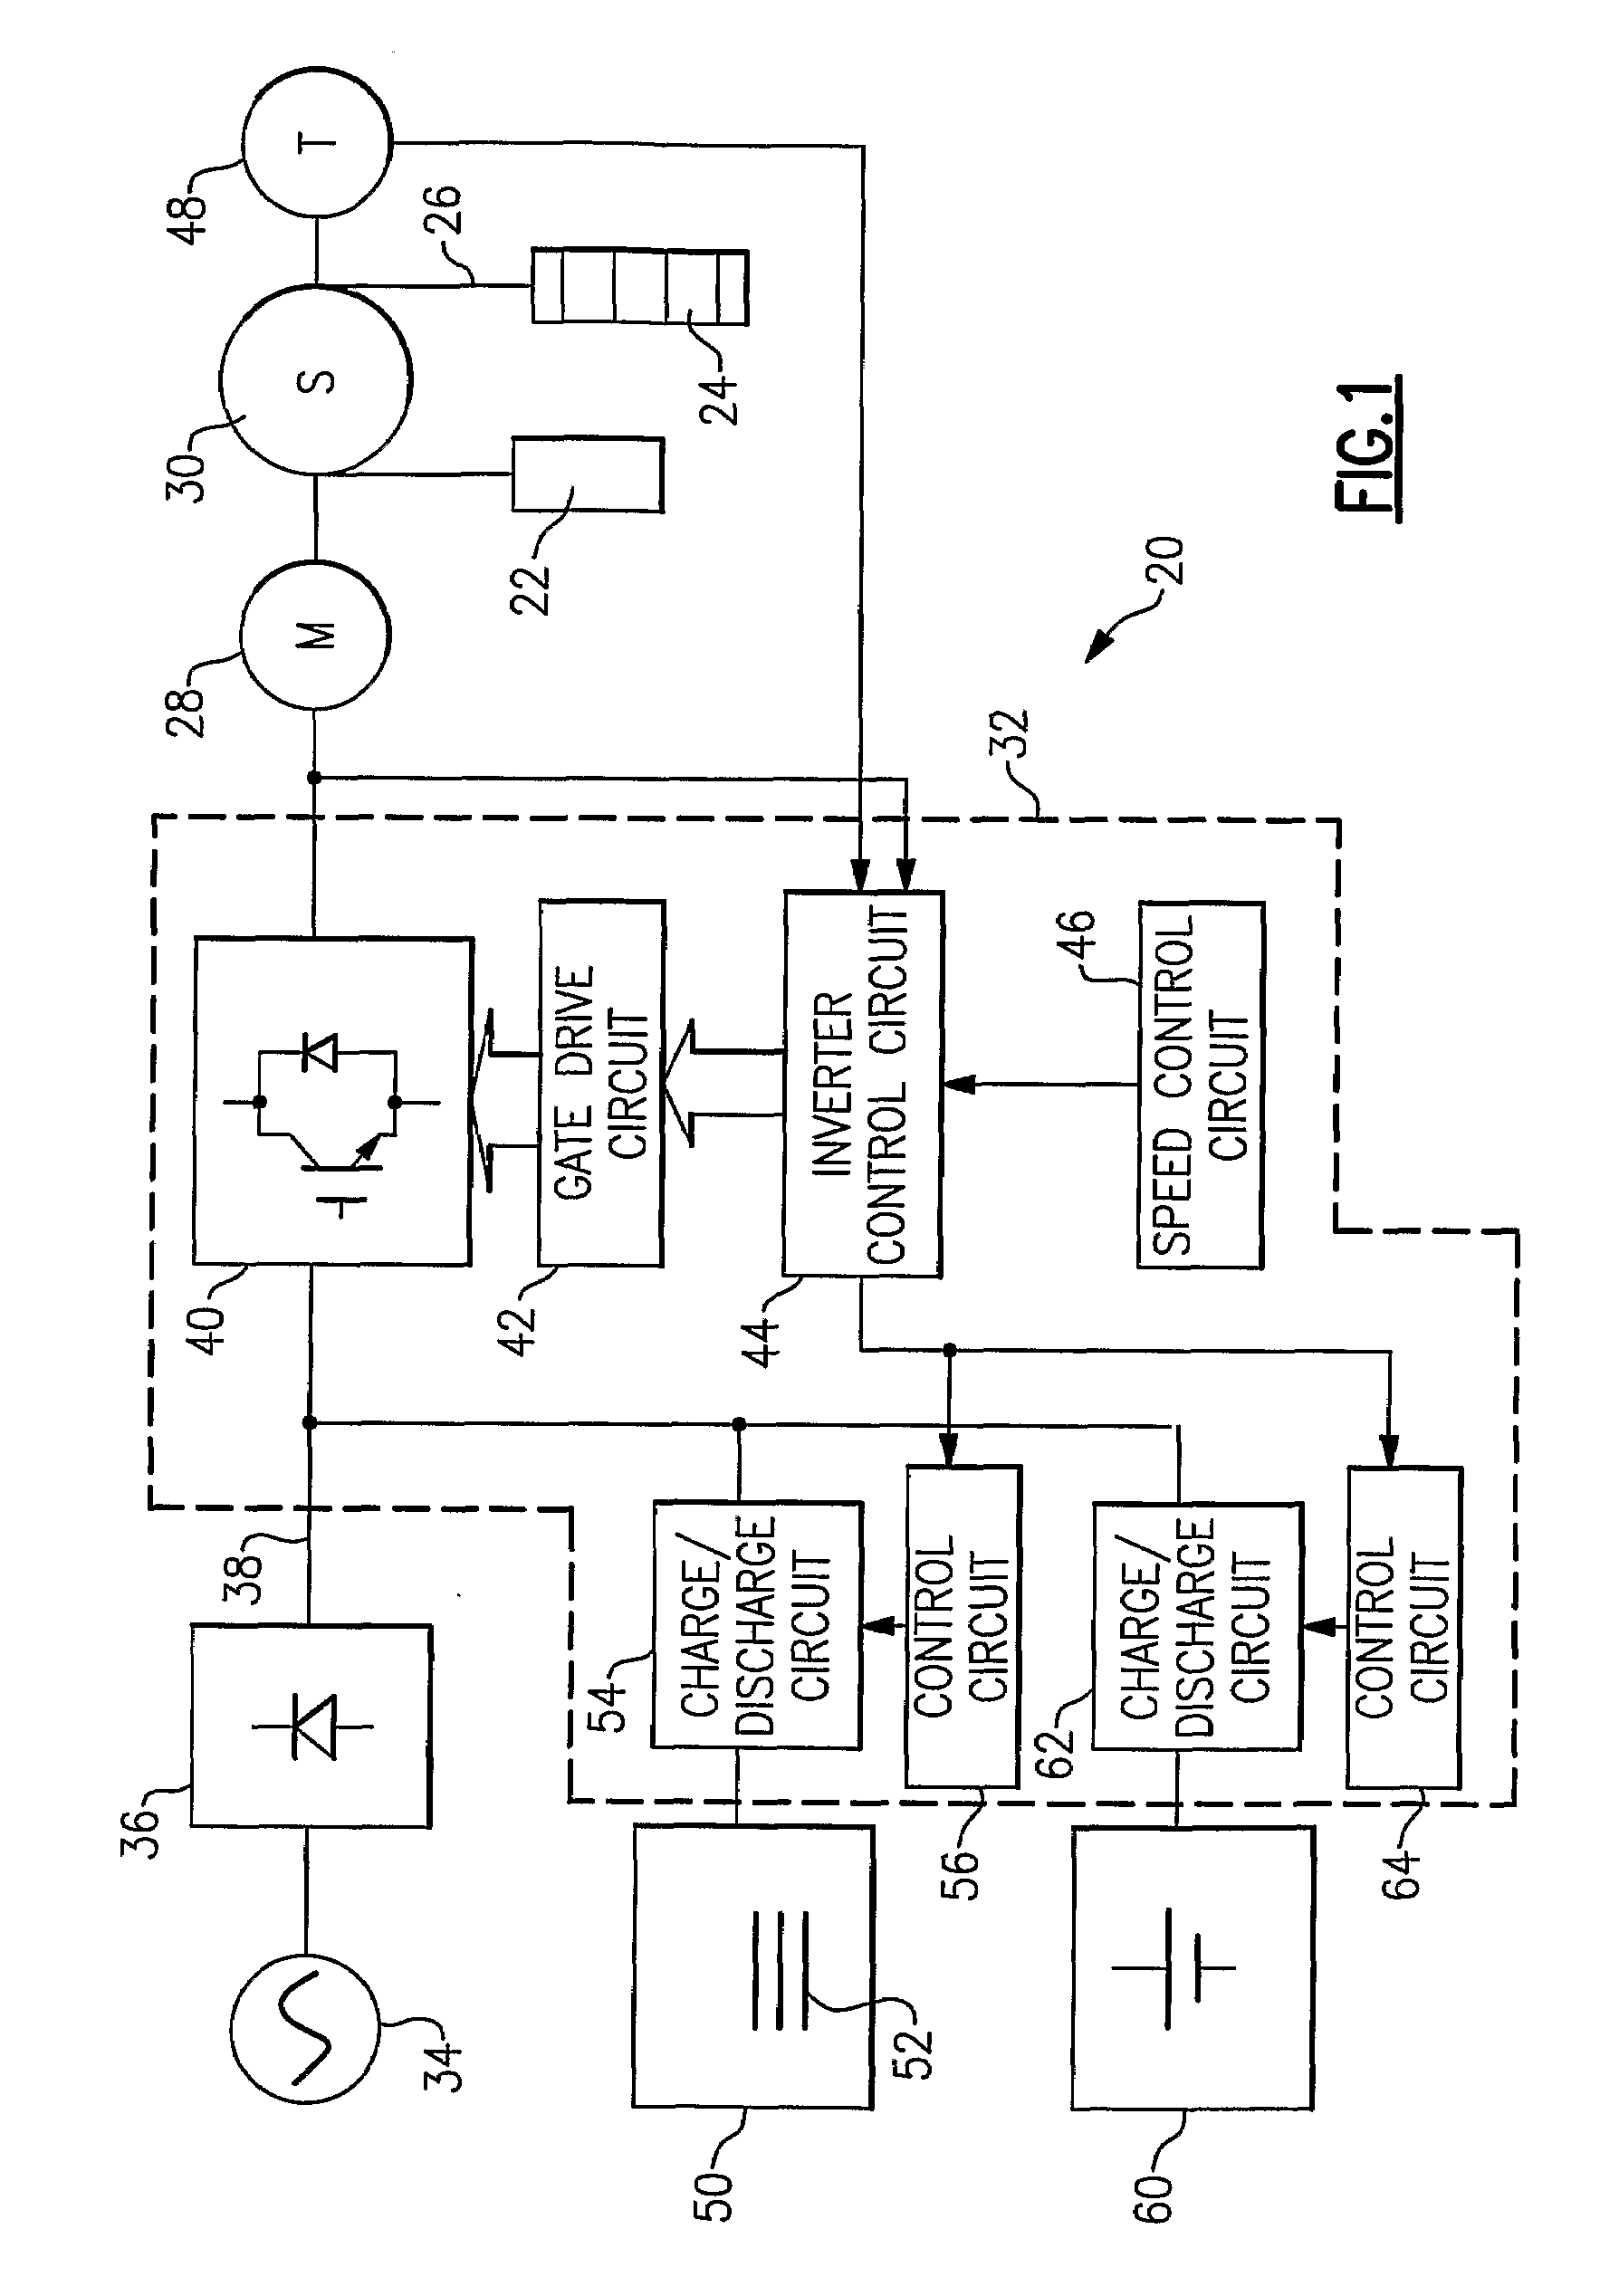 Elevator drive assembly including a capacitive energy storage device